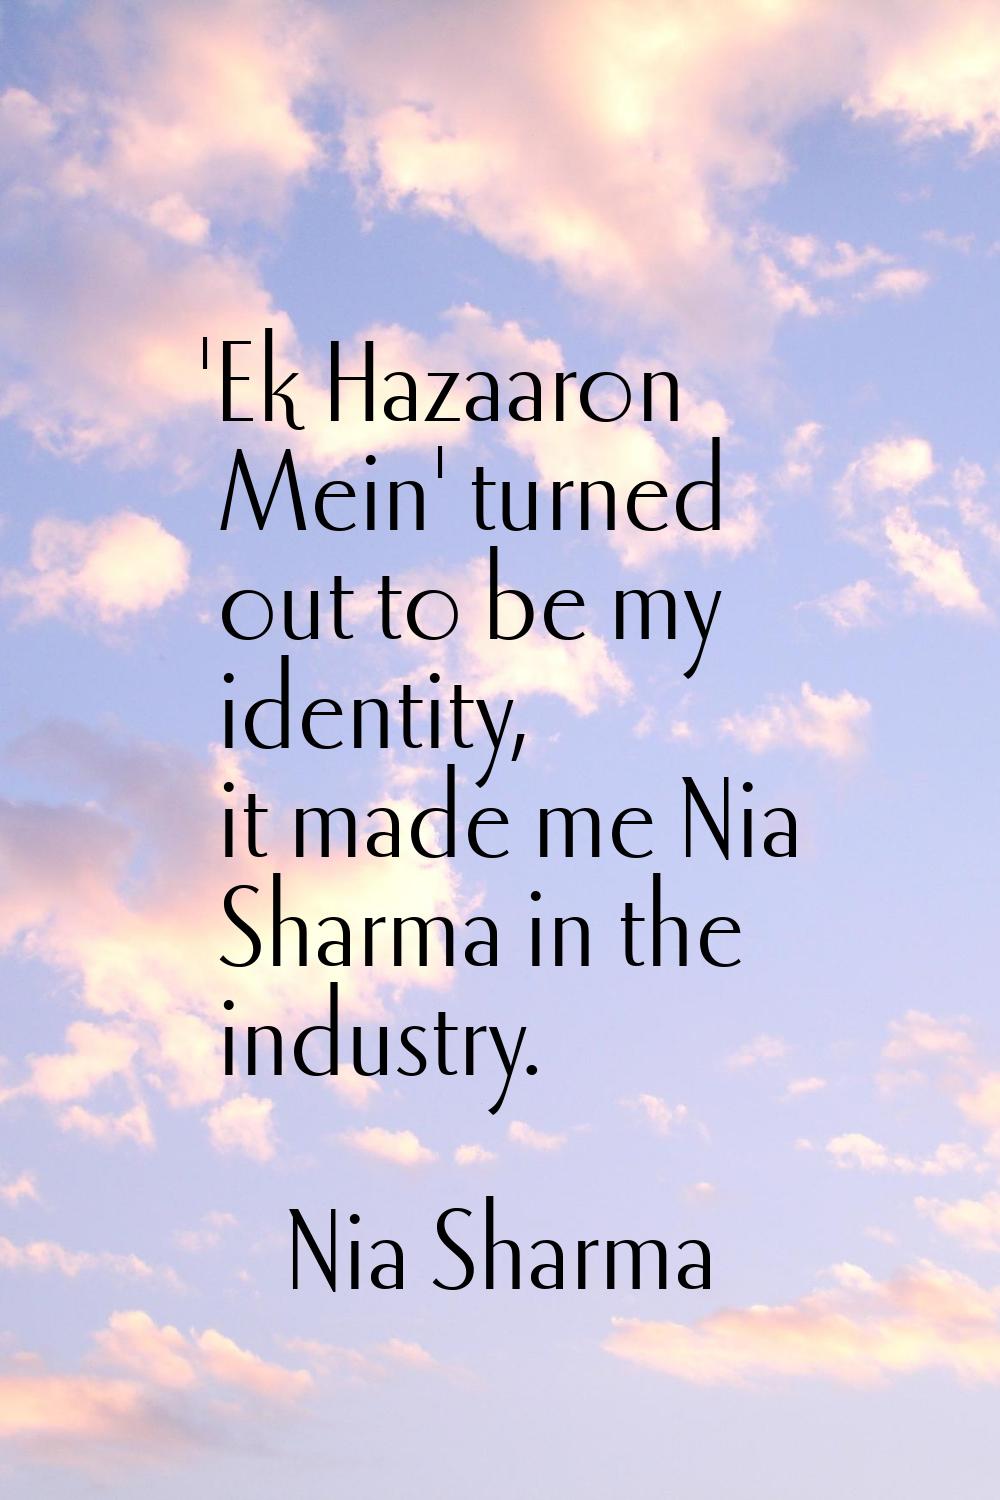 'Ek Hazaaron Mein' turned out to be my identity, it made me Nia Sharma in the industry.